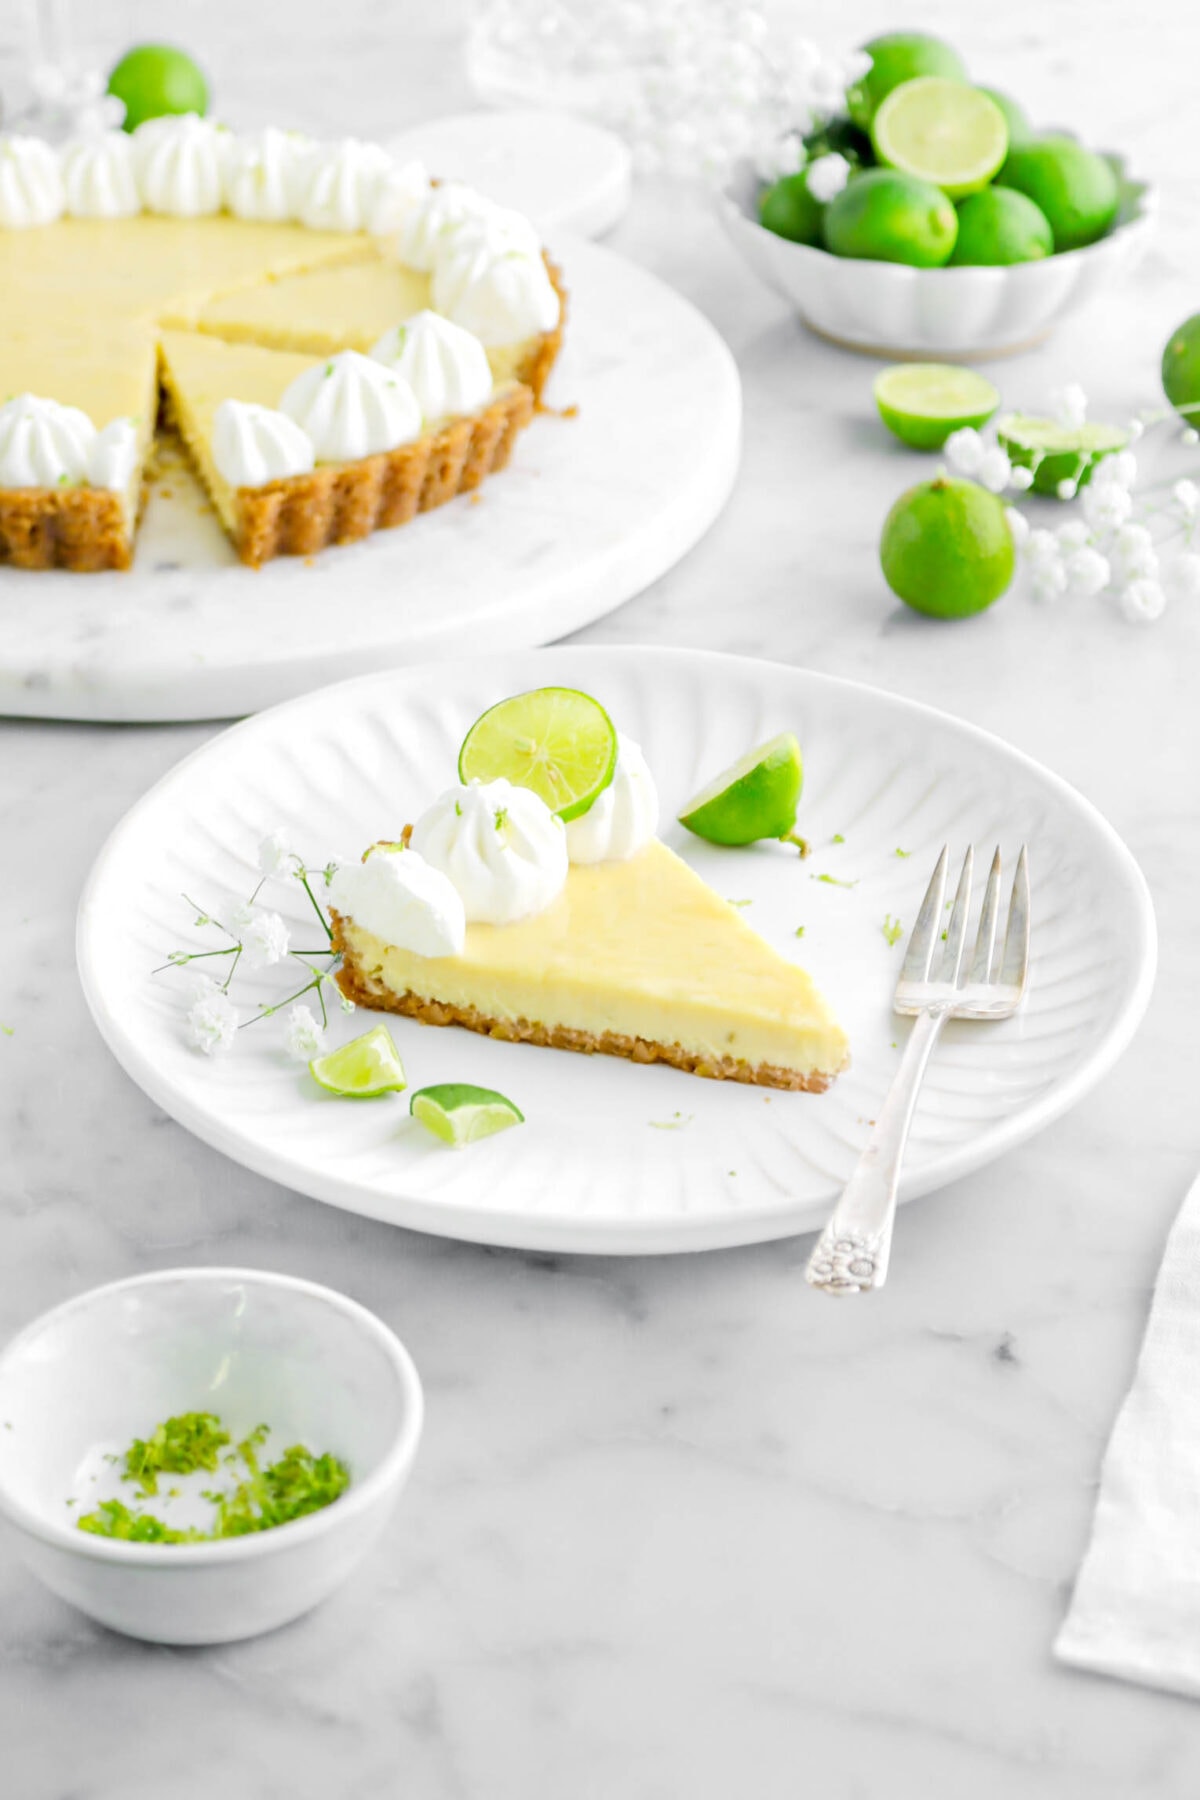 slice of key lime pie on white plate with fork beside, key lime pieces, and white flowers around, with pie and key limes behind on marble surface.